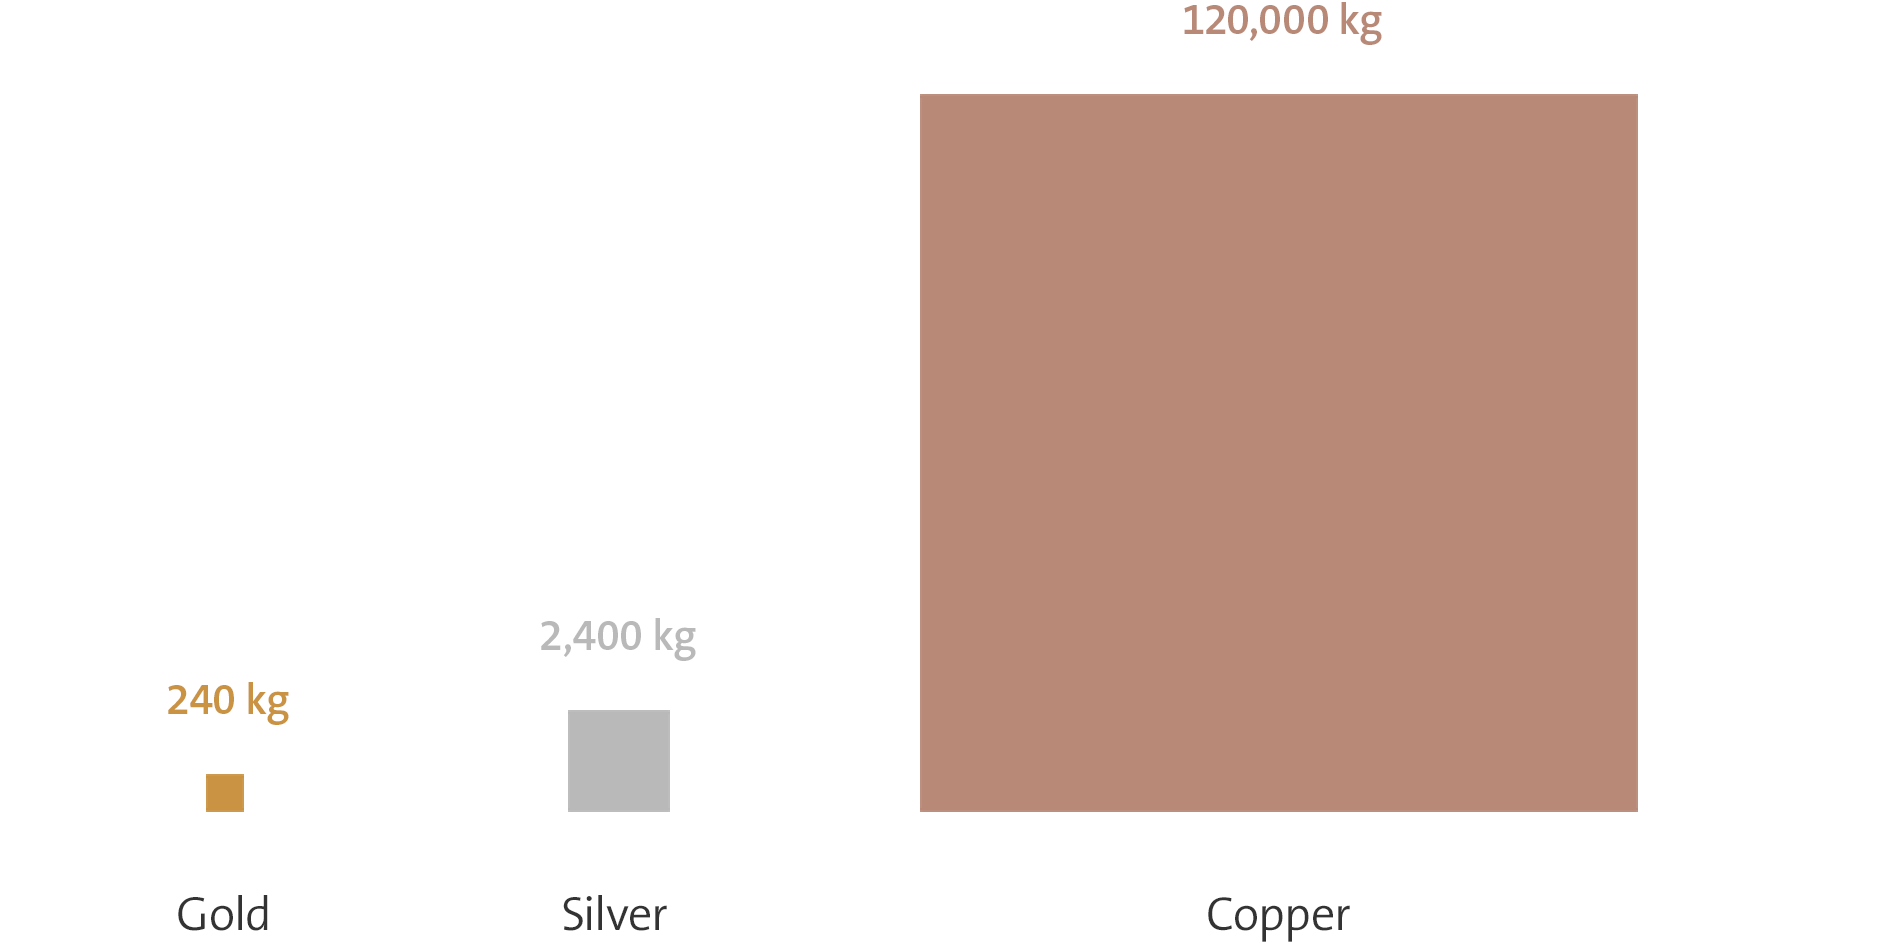 Graphic about valuable raw materials in the eight million unused mobile phones in Switzerland. 240 kg of gold, 2'400 kg of silver and 120'000 kg of copper